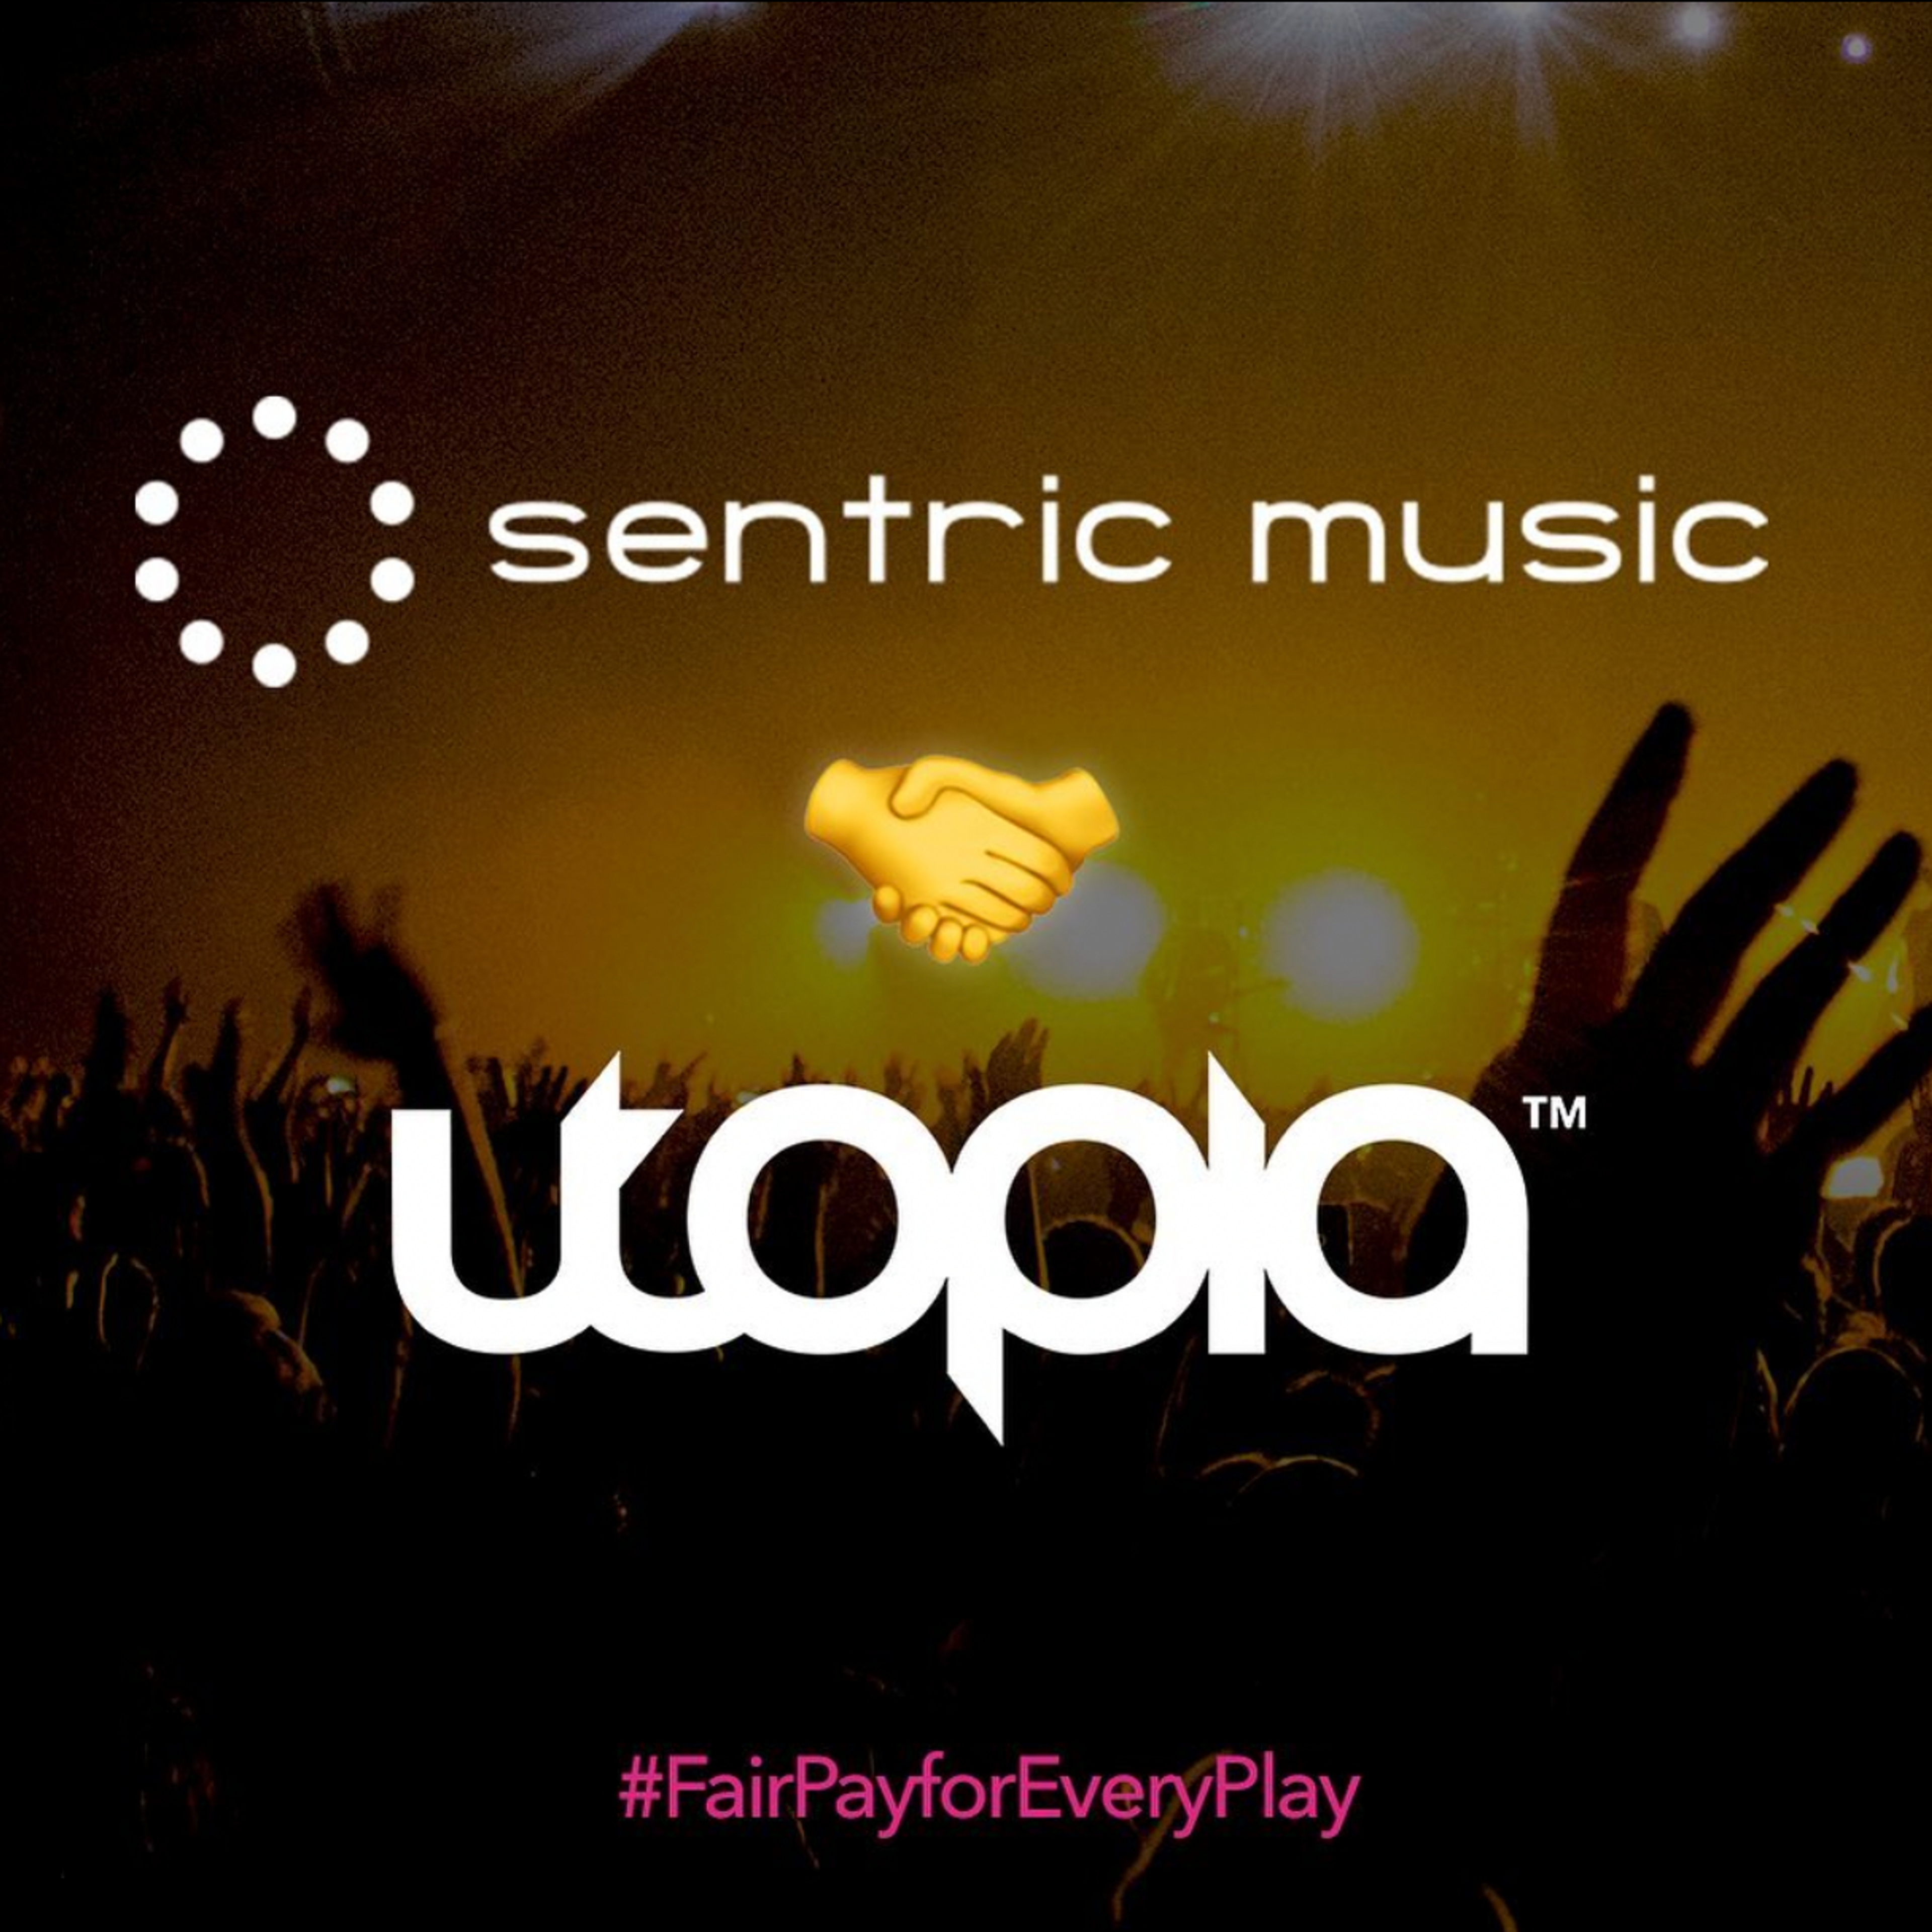 Card image for Utopia Music establishes Royalty Management Services and welcomes Sentric Music Group